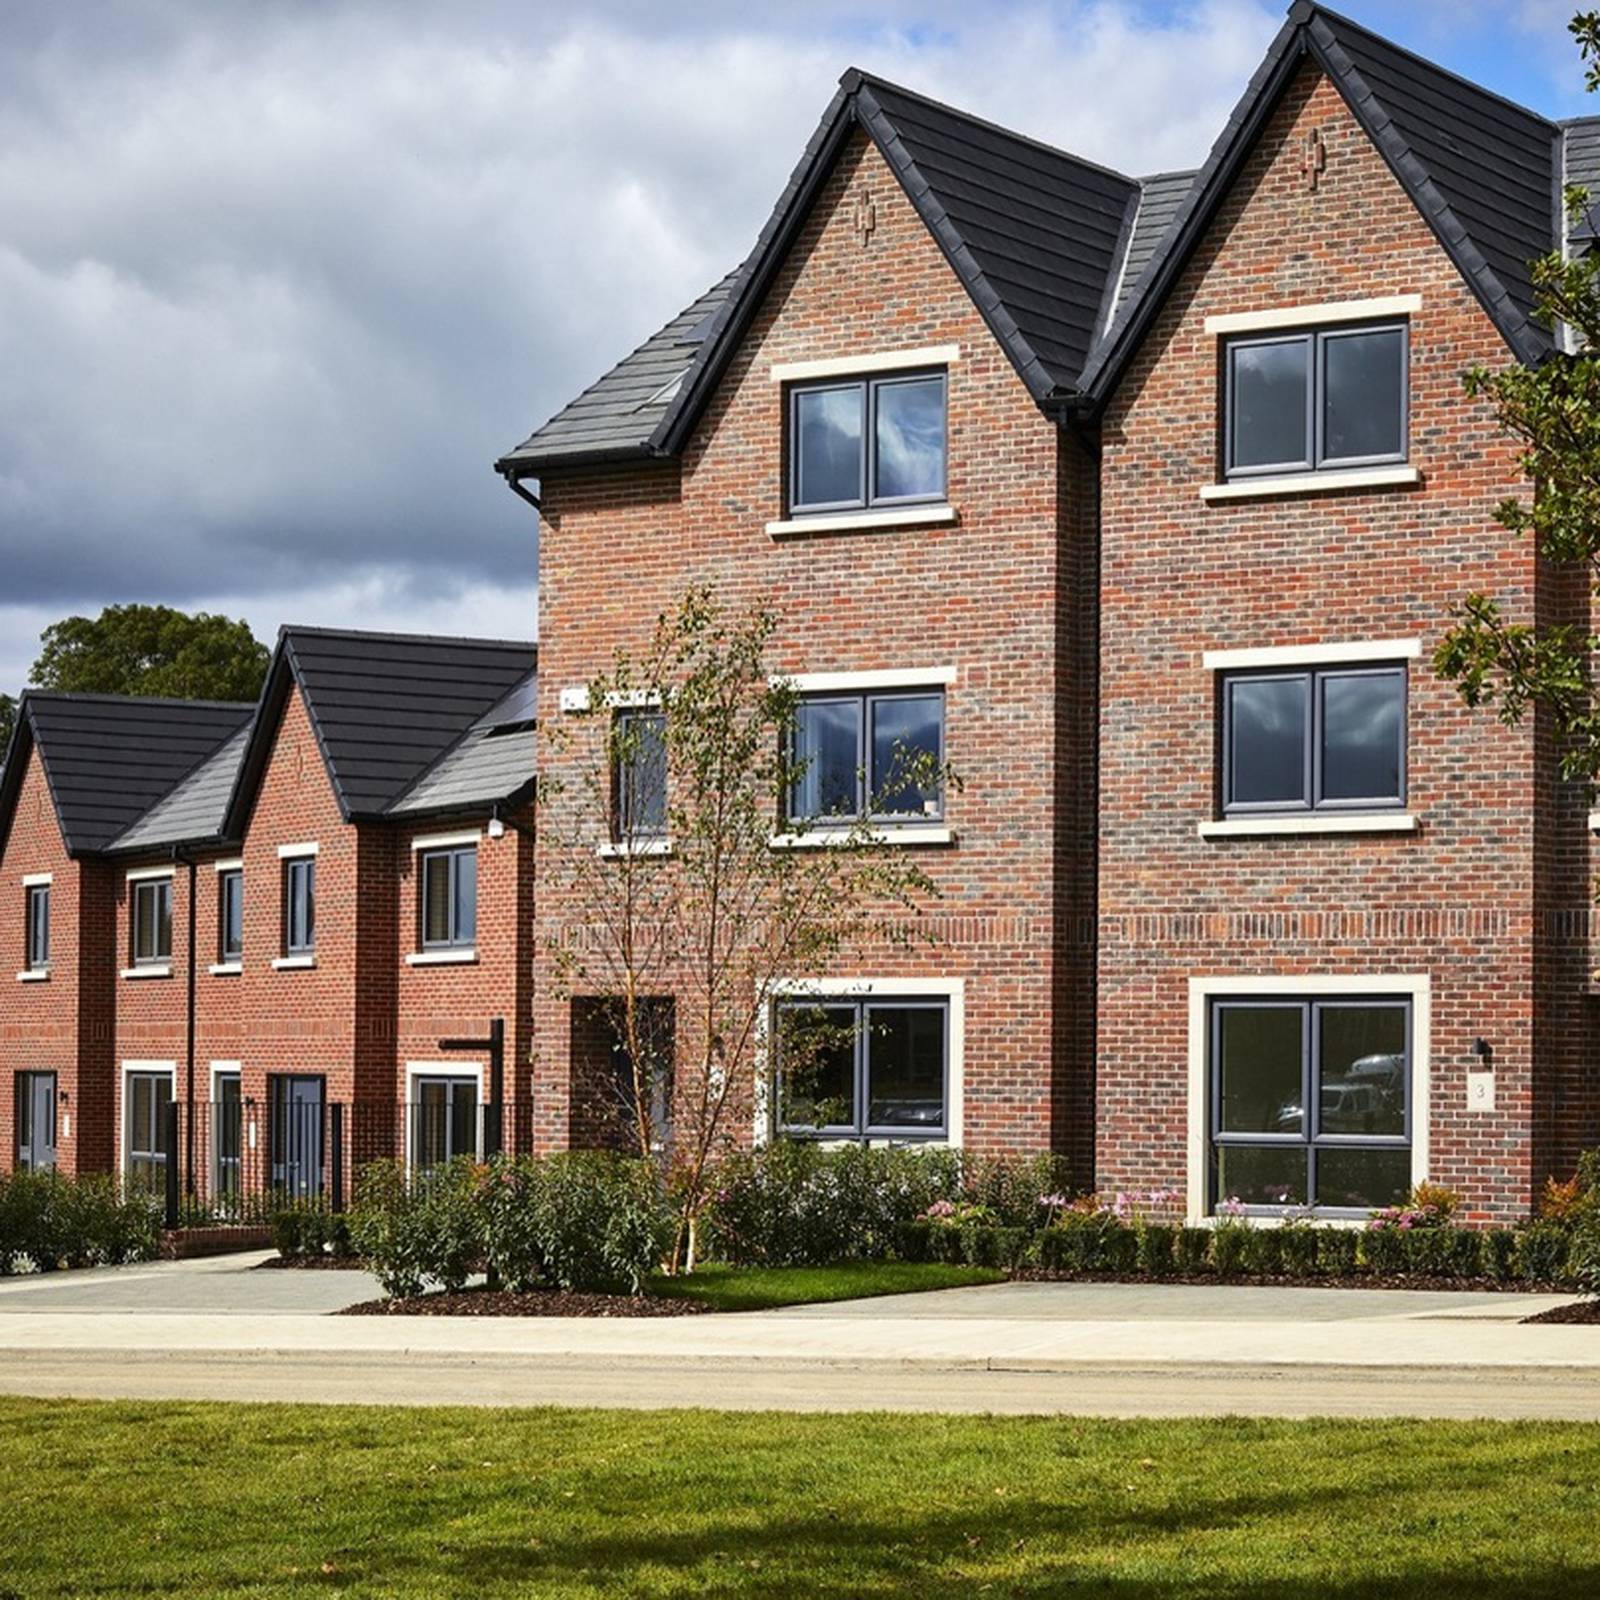 New Homes 2020: What's for sale in well-connected Kildare – The